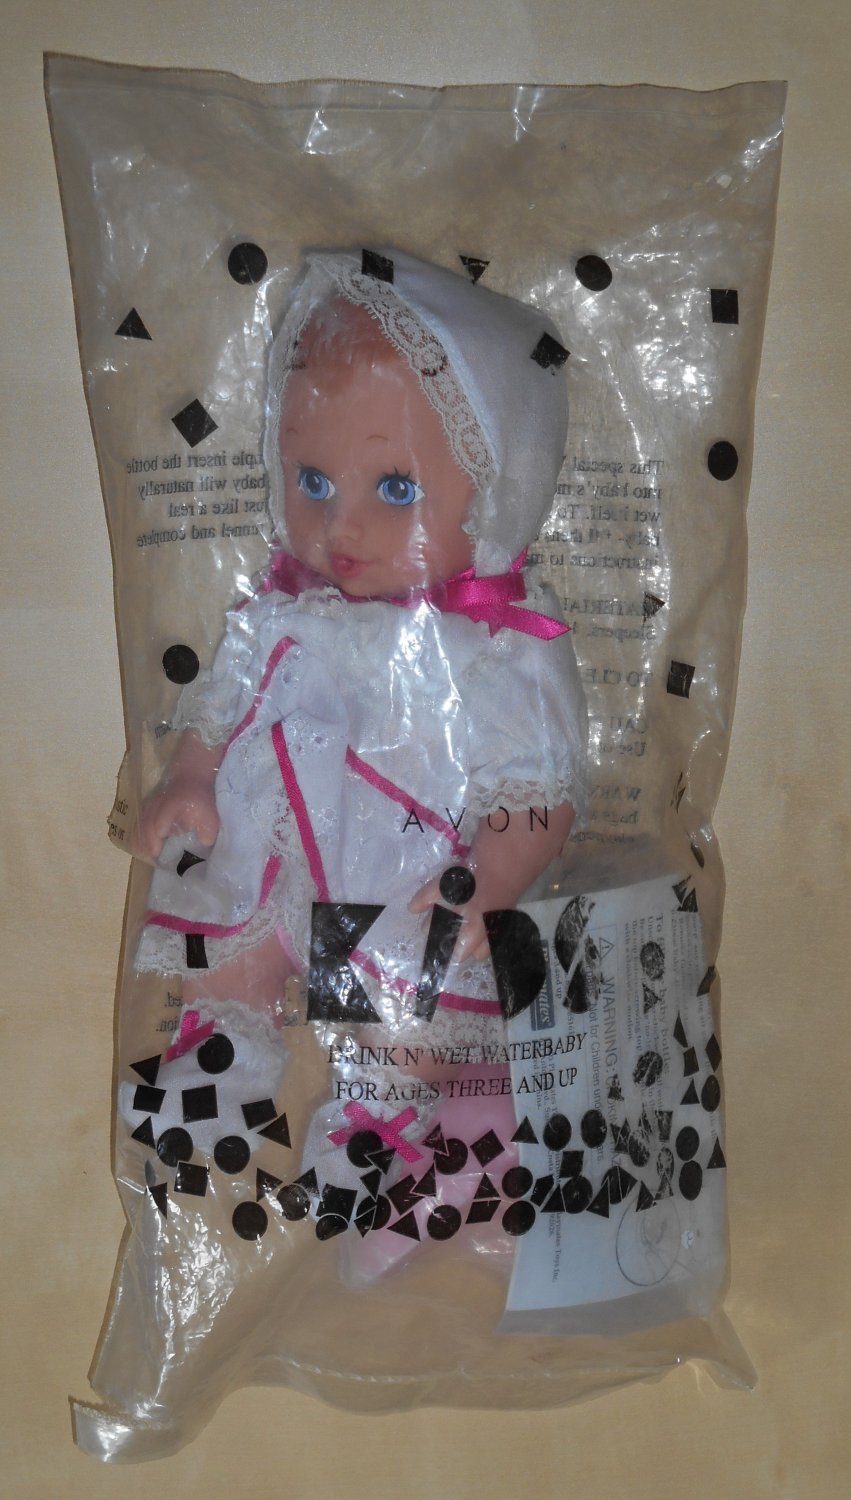 Avon Kids Drink N Wet Waterbaby 9 Inch Doll Caucasian Water Baby Rubber Playmates Lauer Toys 2003